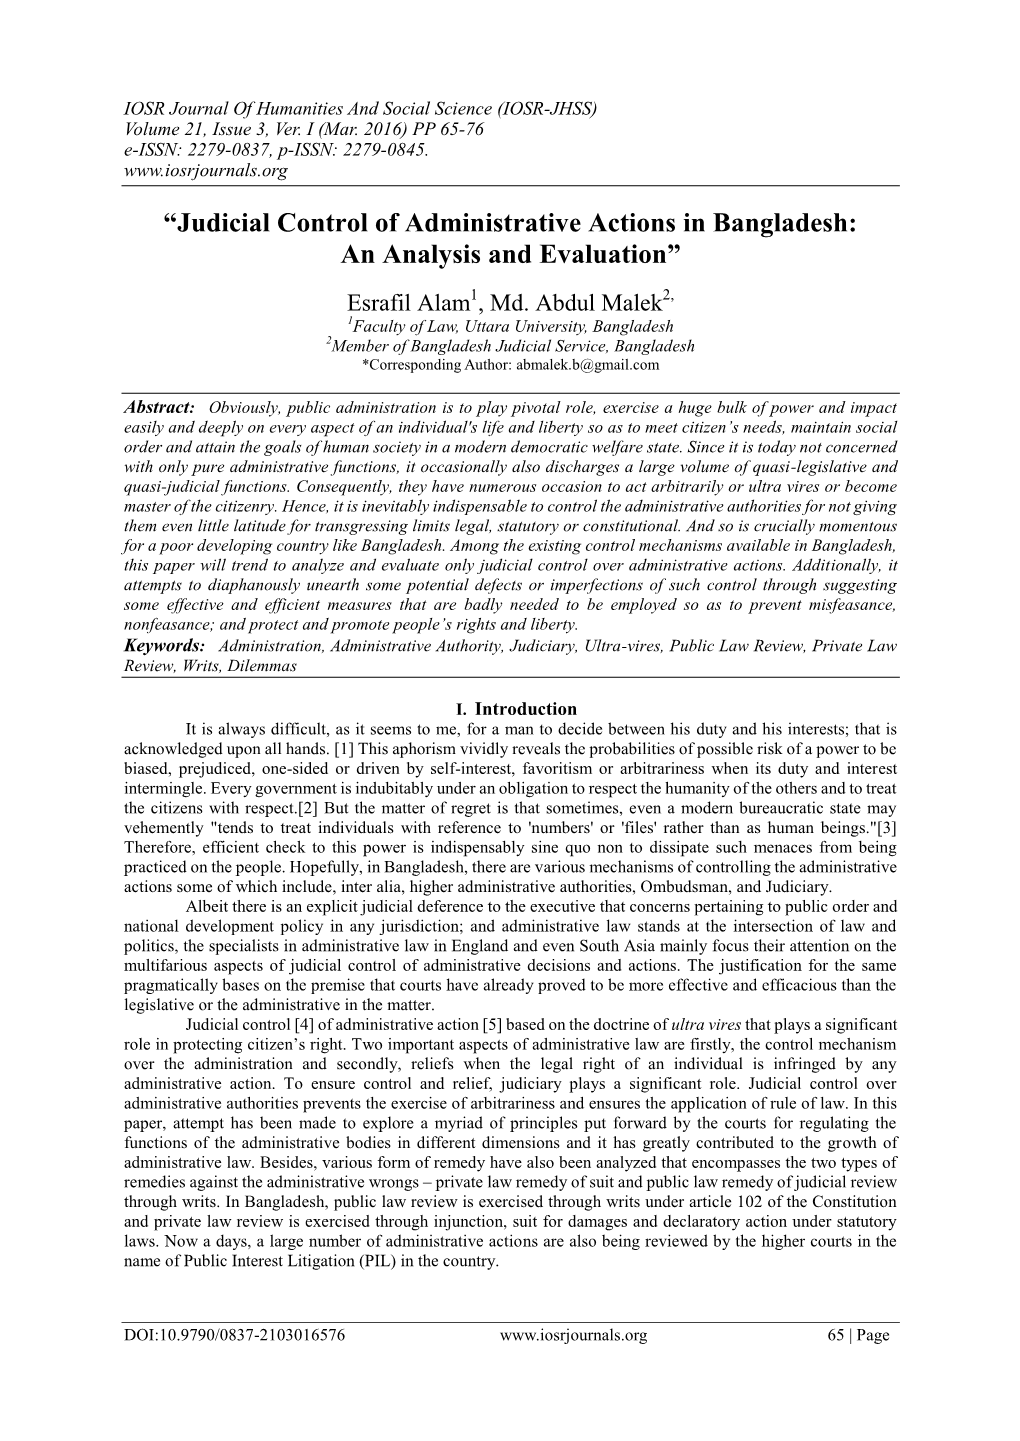 Judicial Control of Administrative Actions in Bangladesh: an Analysis and Evaluation”